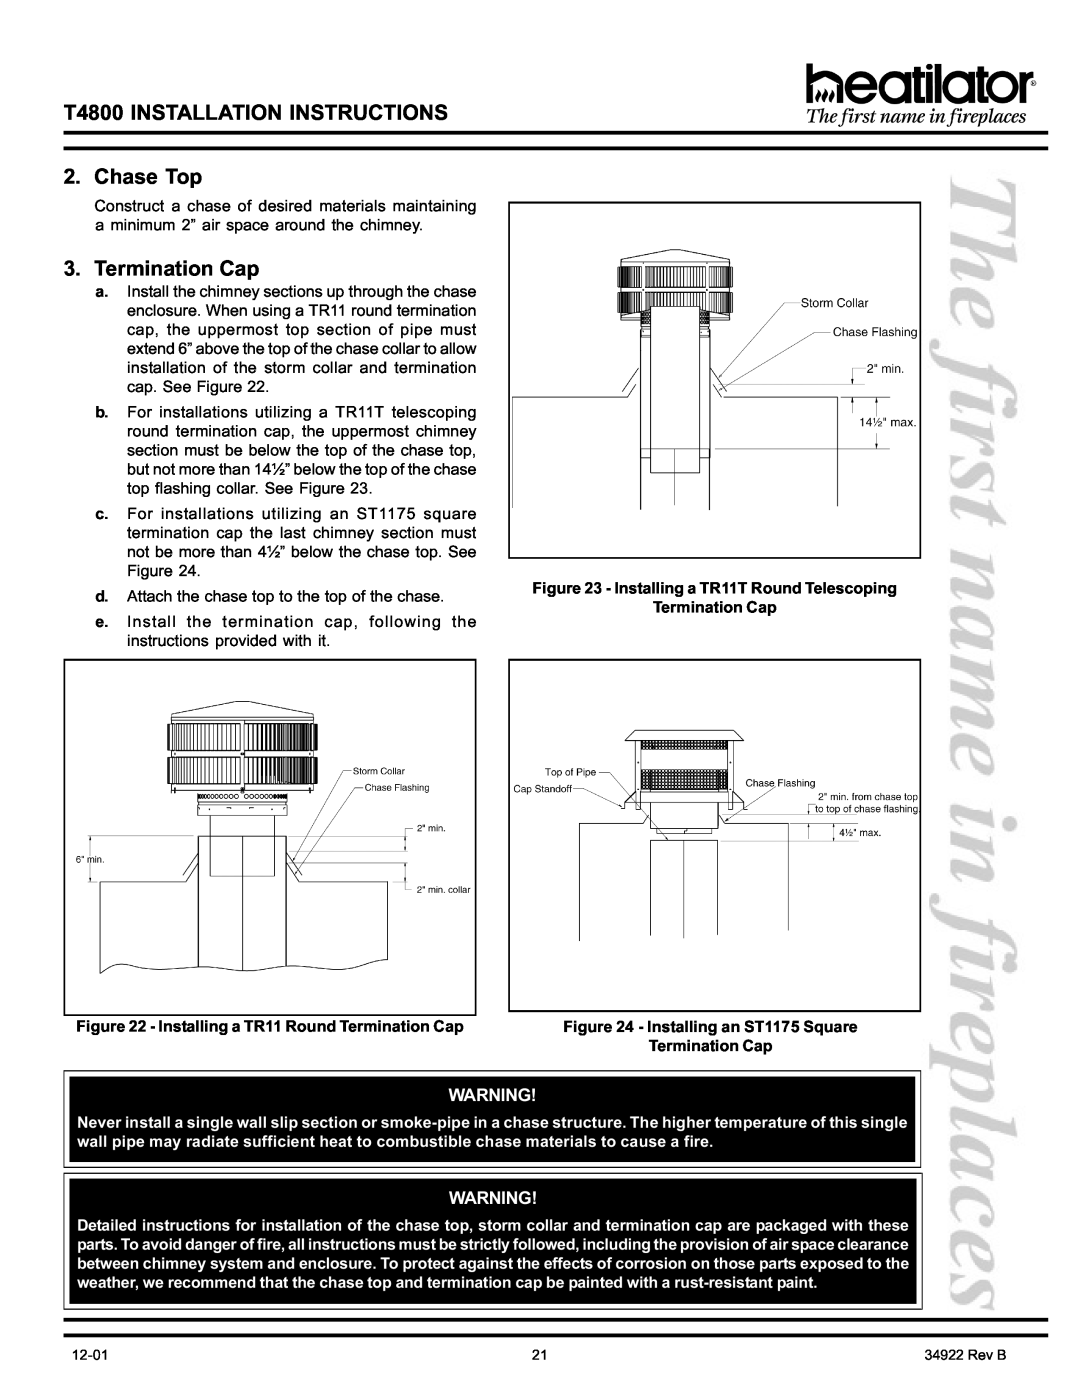 Heatiator manual T4800 INSTALLATION INSTRUCTIONS 2. Chase Top, Termination Cap, Installing a TR11T Round Telescoping 